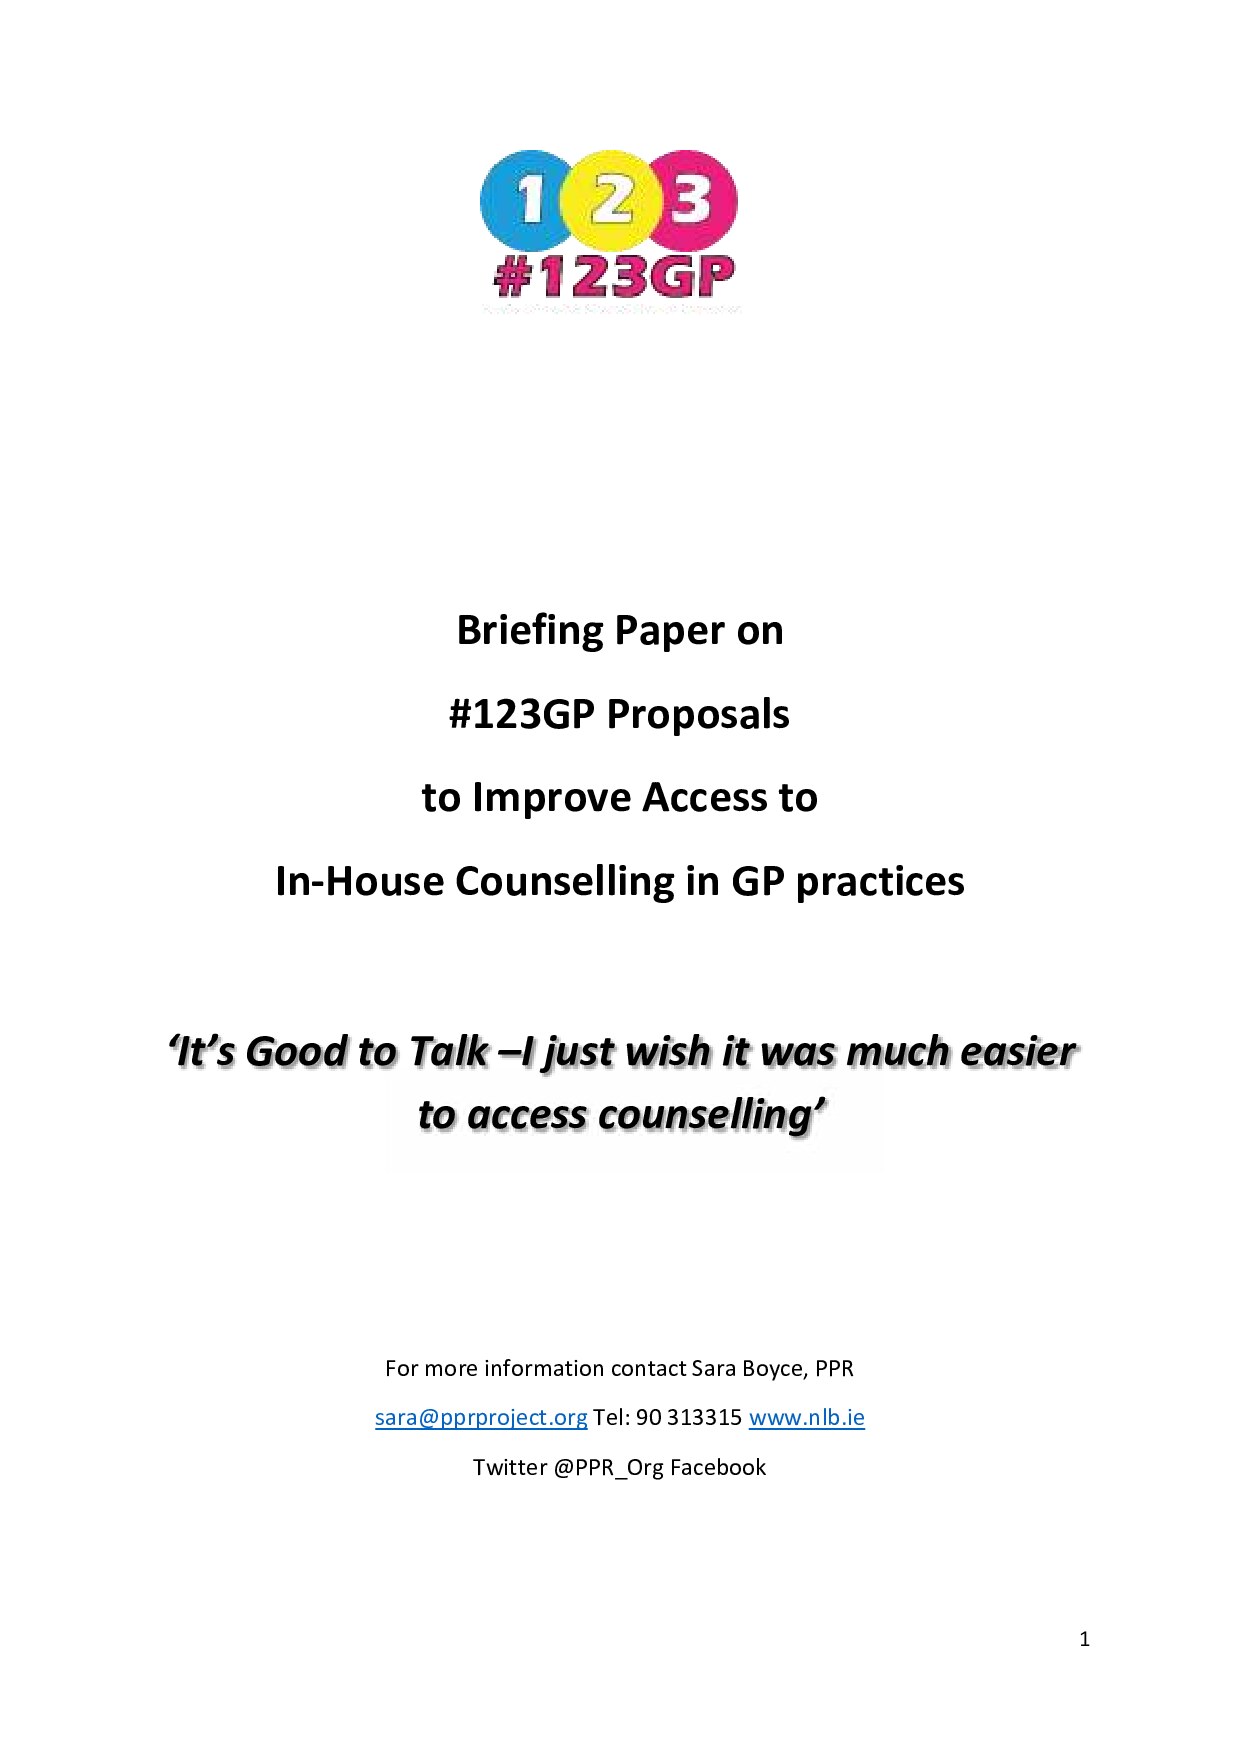 123GP Briefing Paper on proposals to improve access to GP practice-based counselling